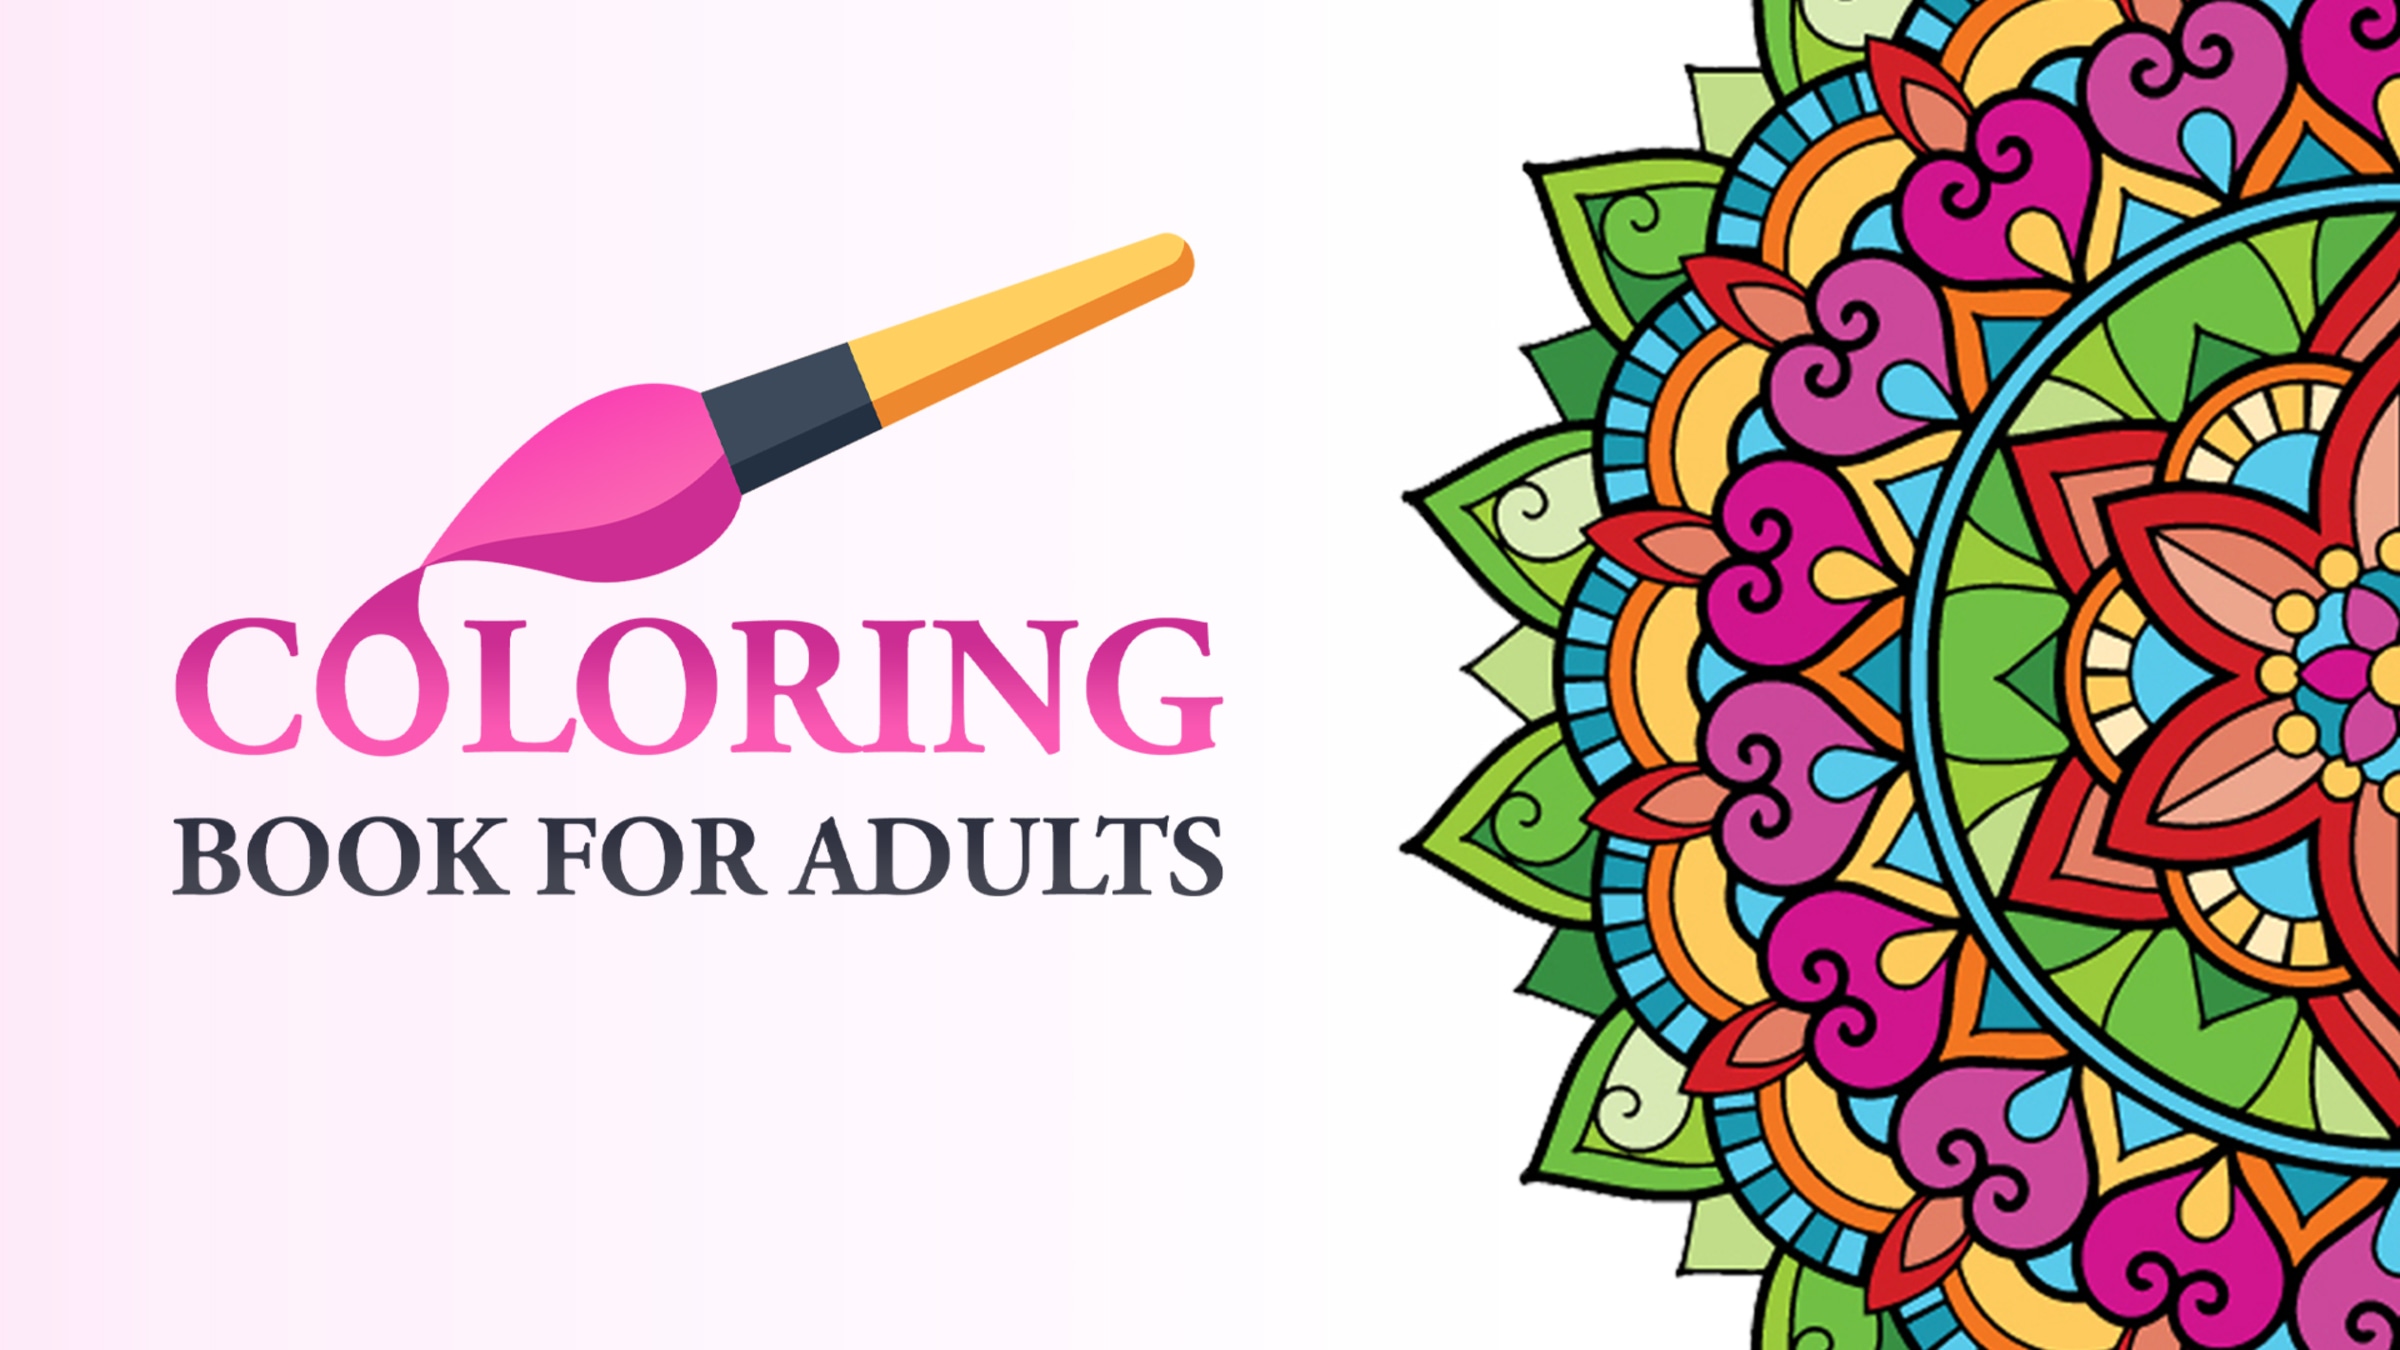 Coloring book for adults for switch